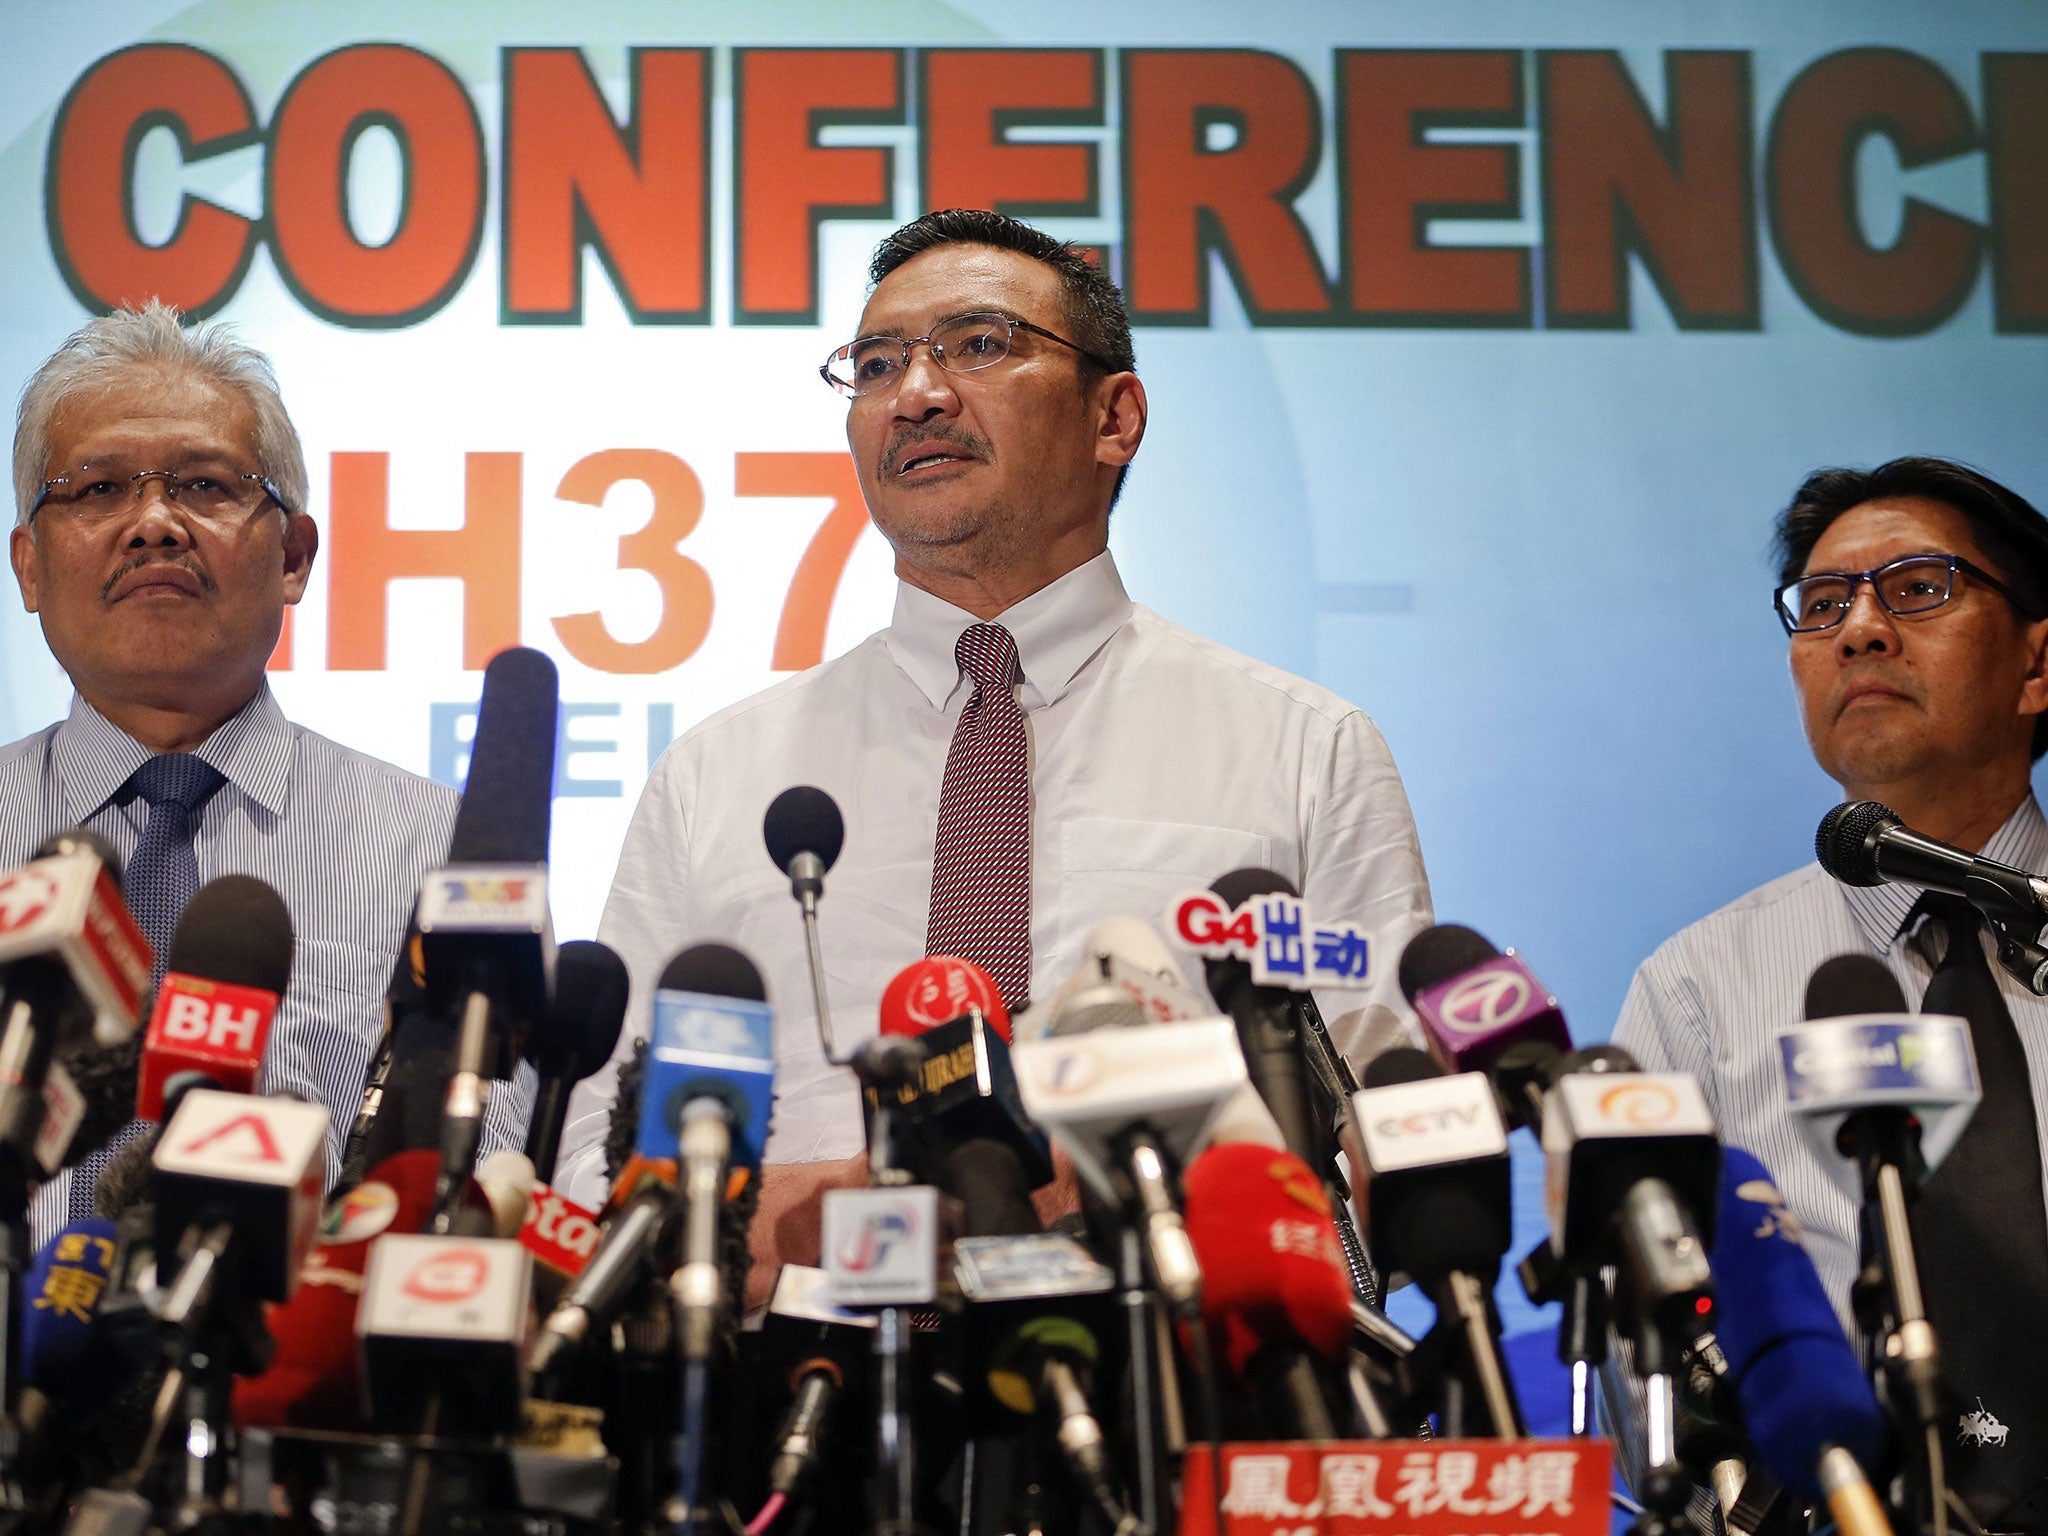 Malaysia's acting Transport Minister Hishammuddin Hussein (C) is accompanied by Deputy Foreign Minister Hamzah Zainudin (L) and Department of Civil Aviation's Director General Azharuddin Abdul Rahman as he addresses reporters about the missing Malaysia Ai